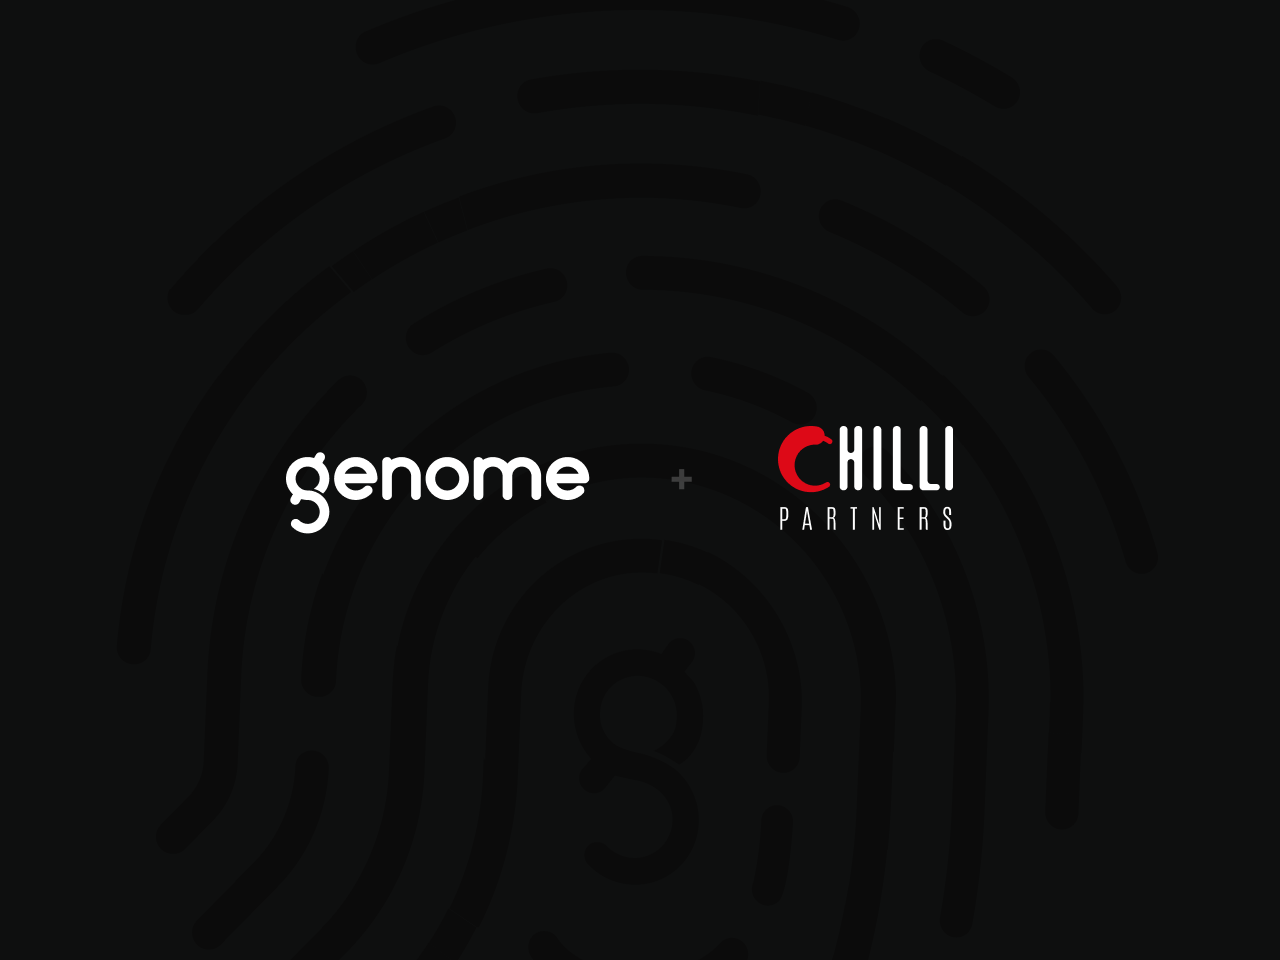 Leading the charge in the convergence of financial technology and iGaming, Genome, a cutting-edge electronic money institution, is thrilled to announce its strategic partnership with Chilli Partners, a prominent iGaming affiliate program specializing in casino games.